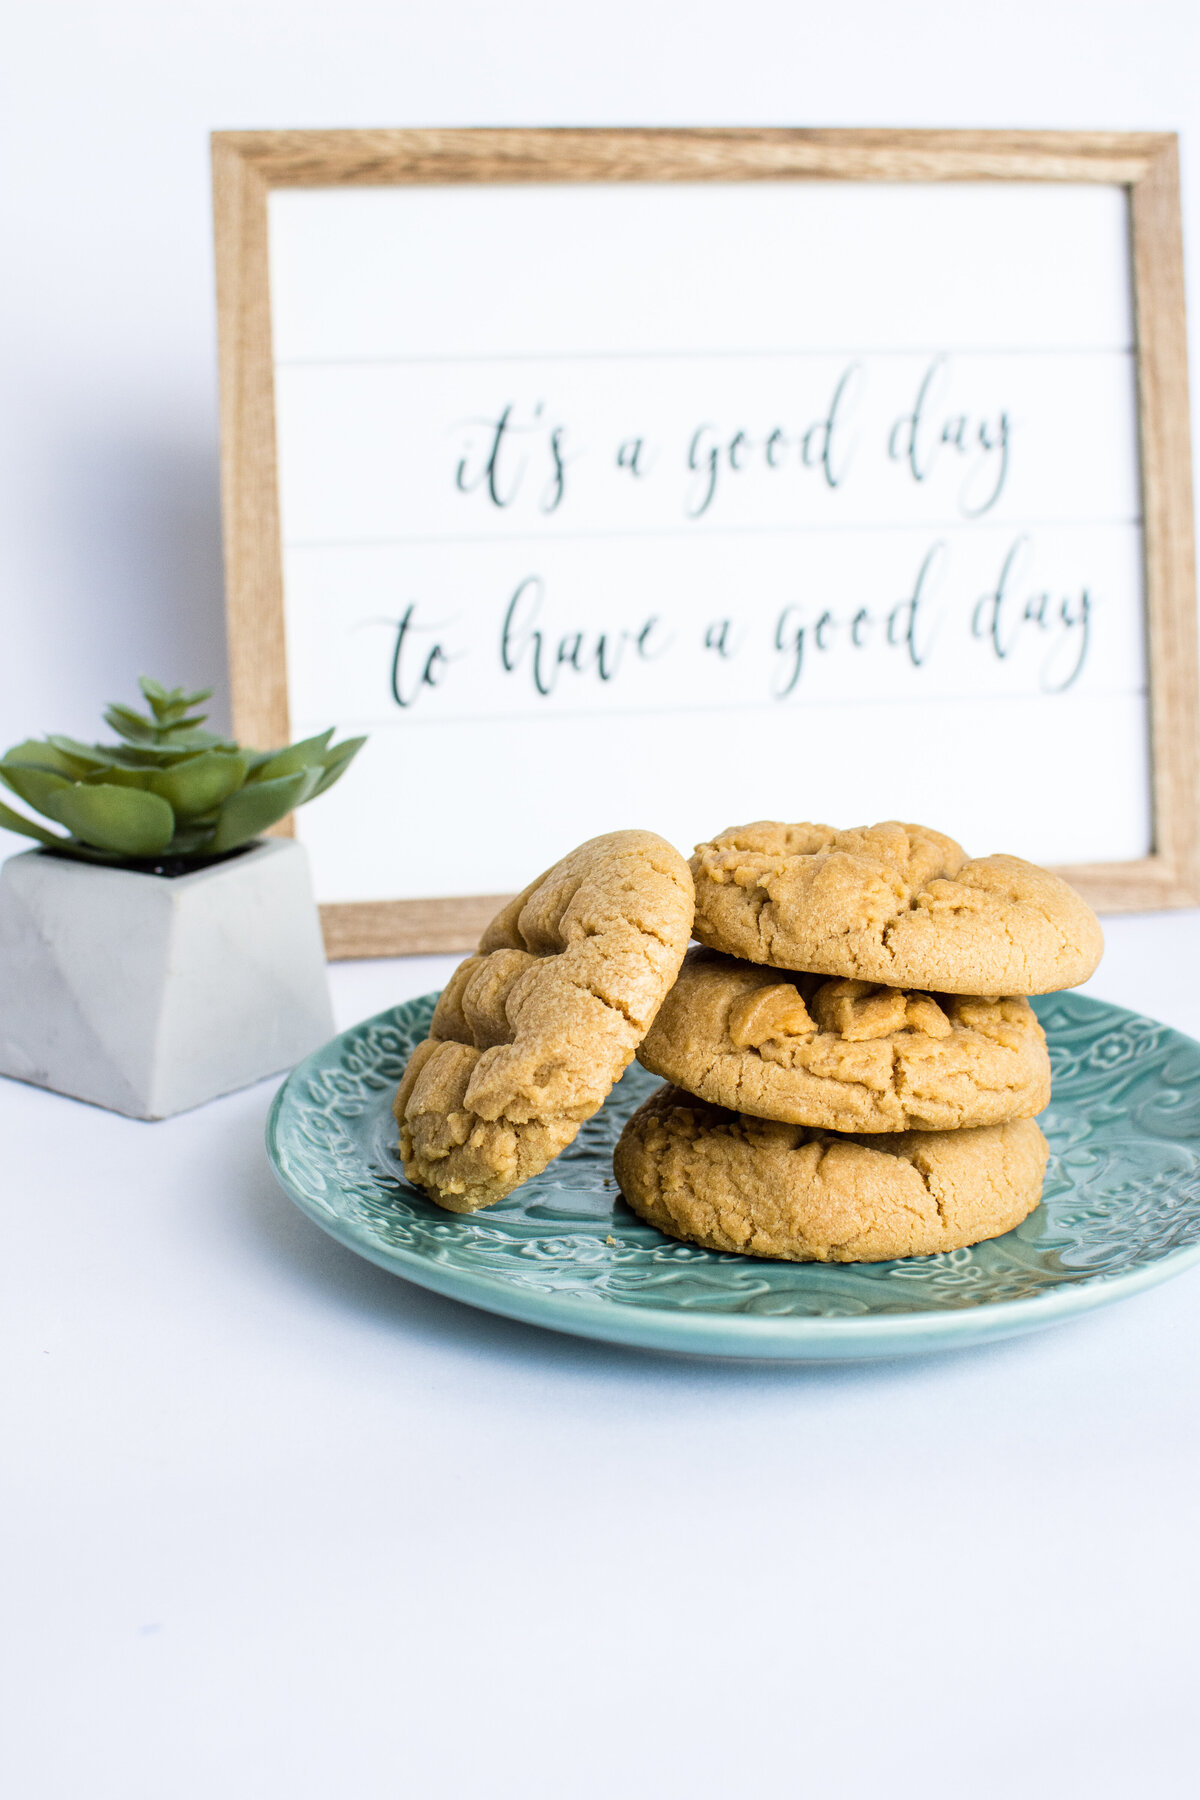 Peanut Butter cookies stacked on a green plate in front of a framed artwork that say "It's a good day to have a good day"